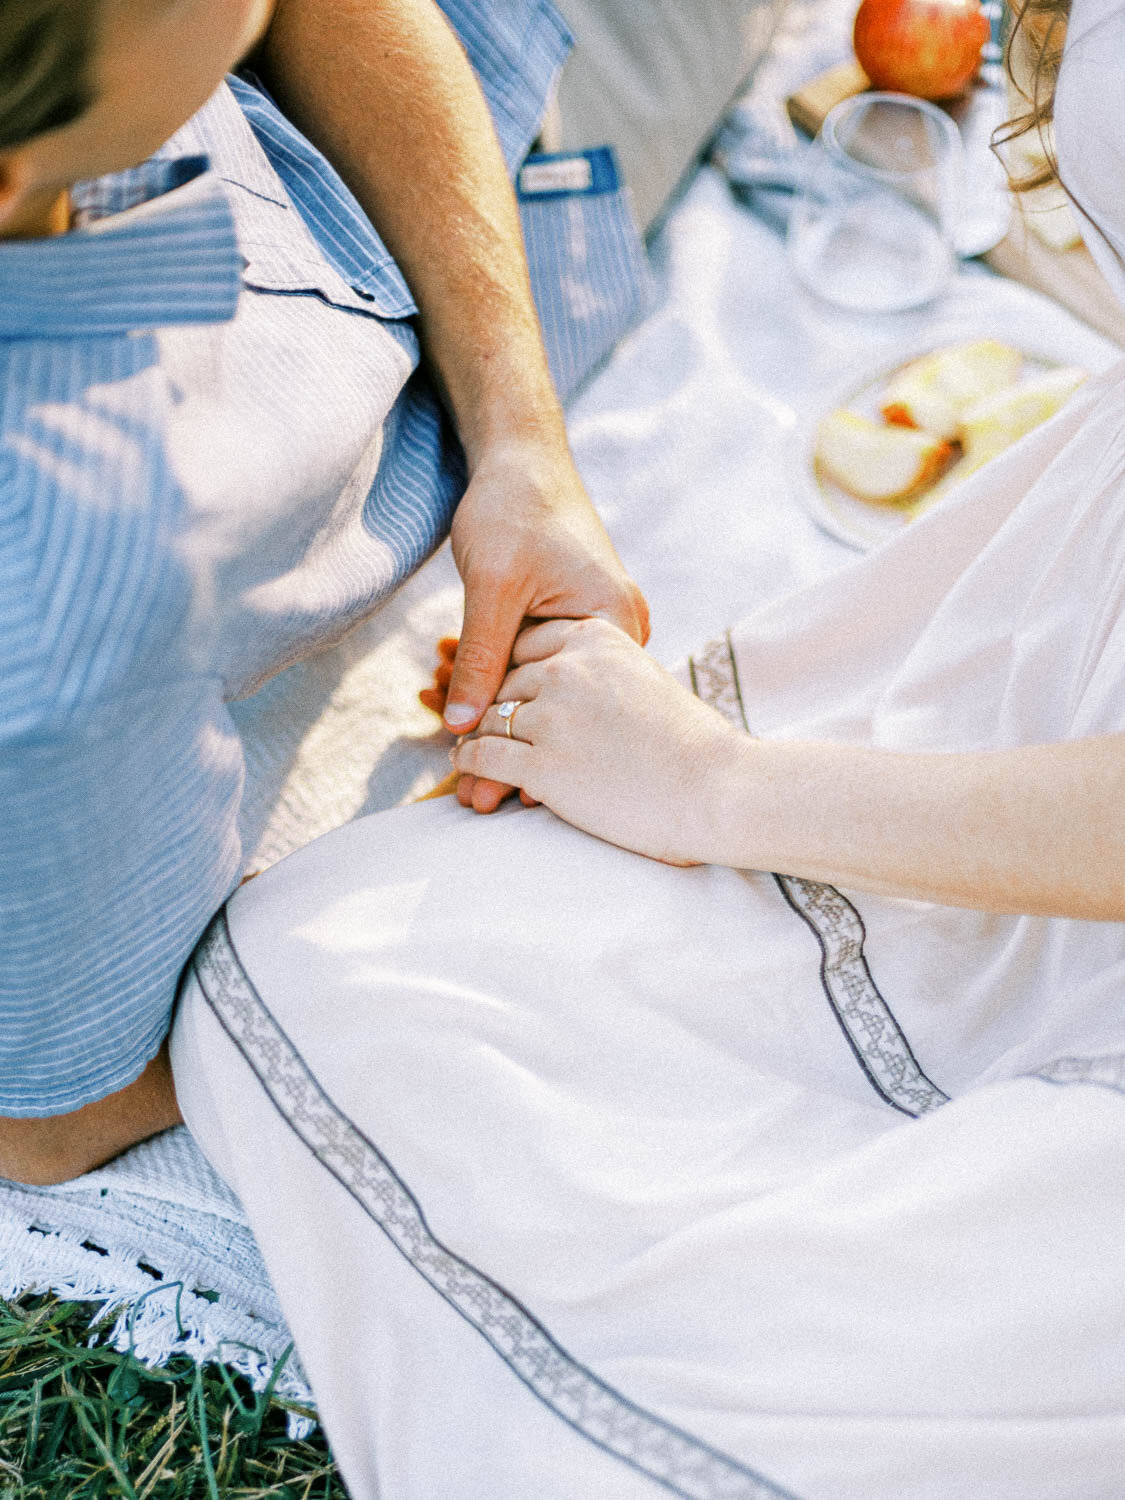 man-and-woman-with-engagement-ring-hold-hands-during-fall-picnic-in-charlottesville-virginia.jpg